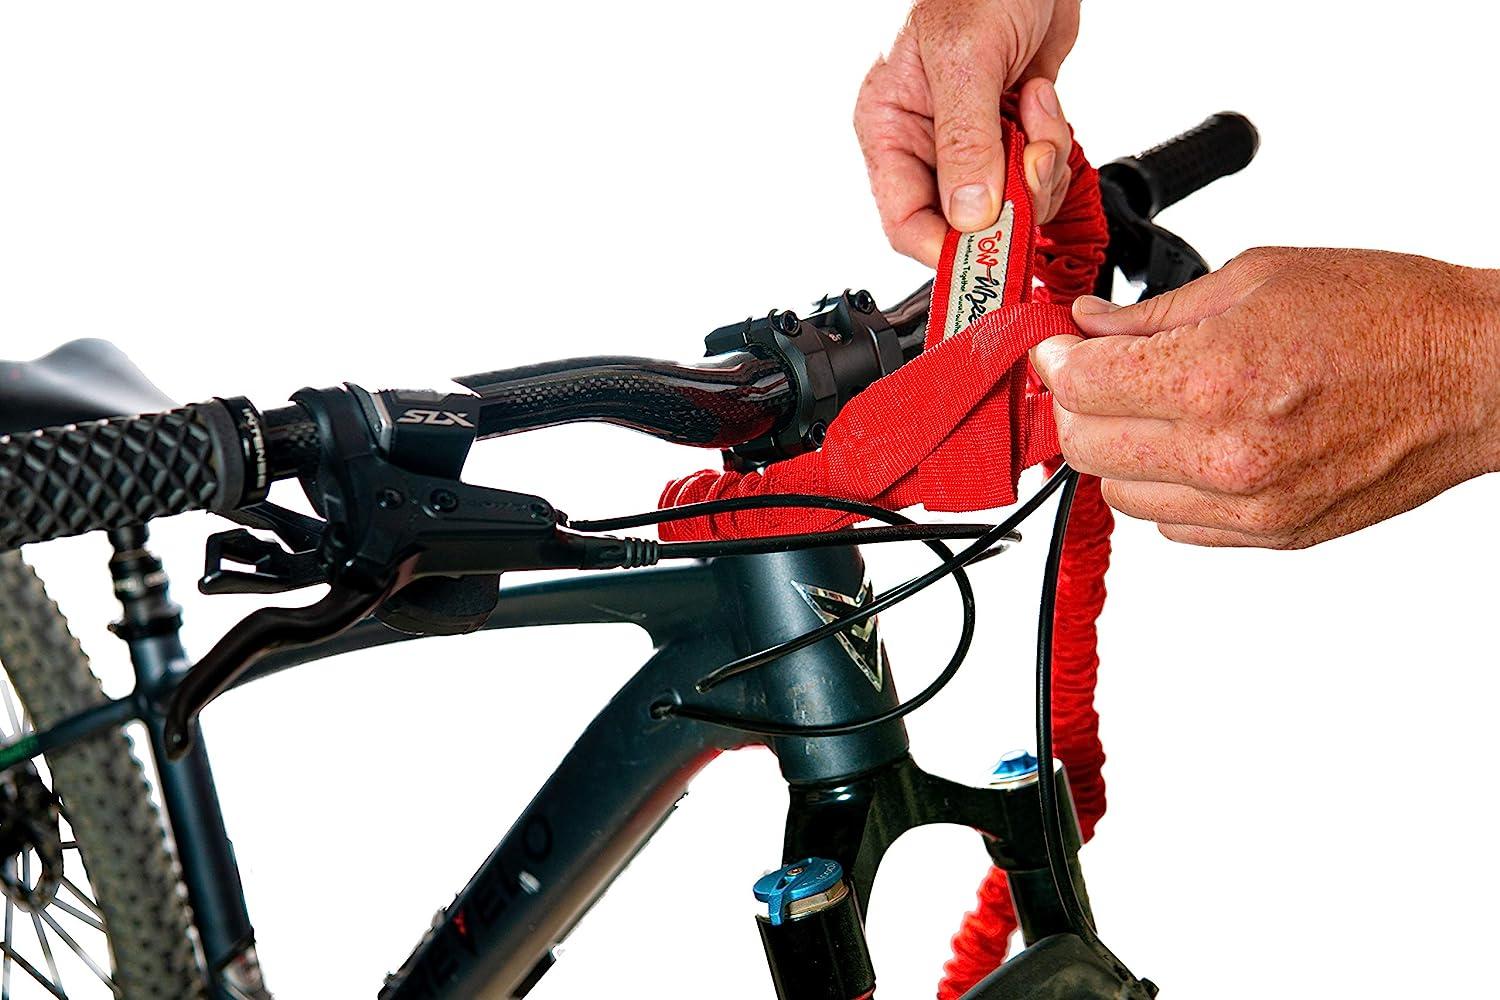 TowWhee - The Original Bike Bungee Tow Rope for Kids, MTB & Cycling  Stretch Pull Strap for Riding Further with Your Child